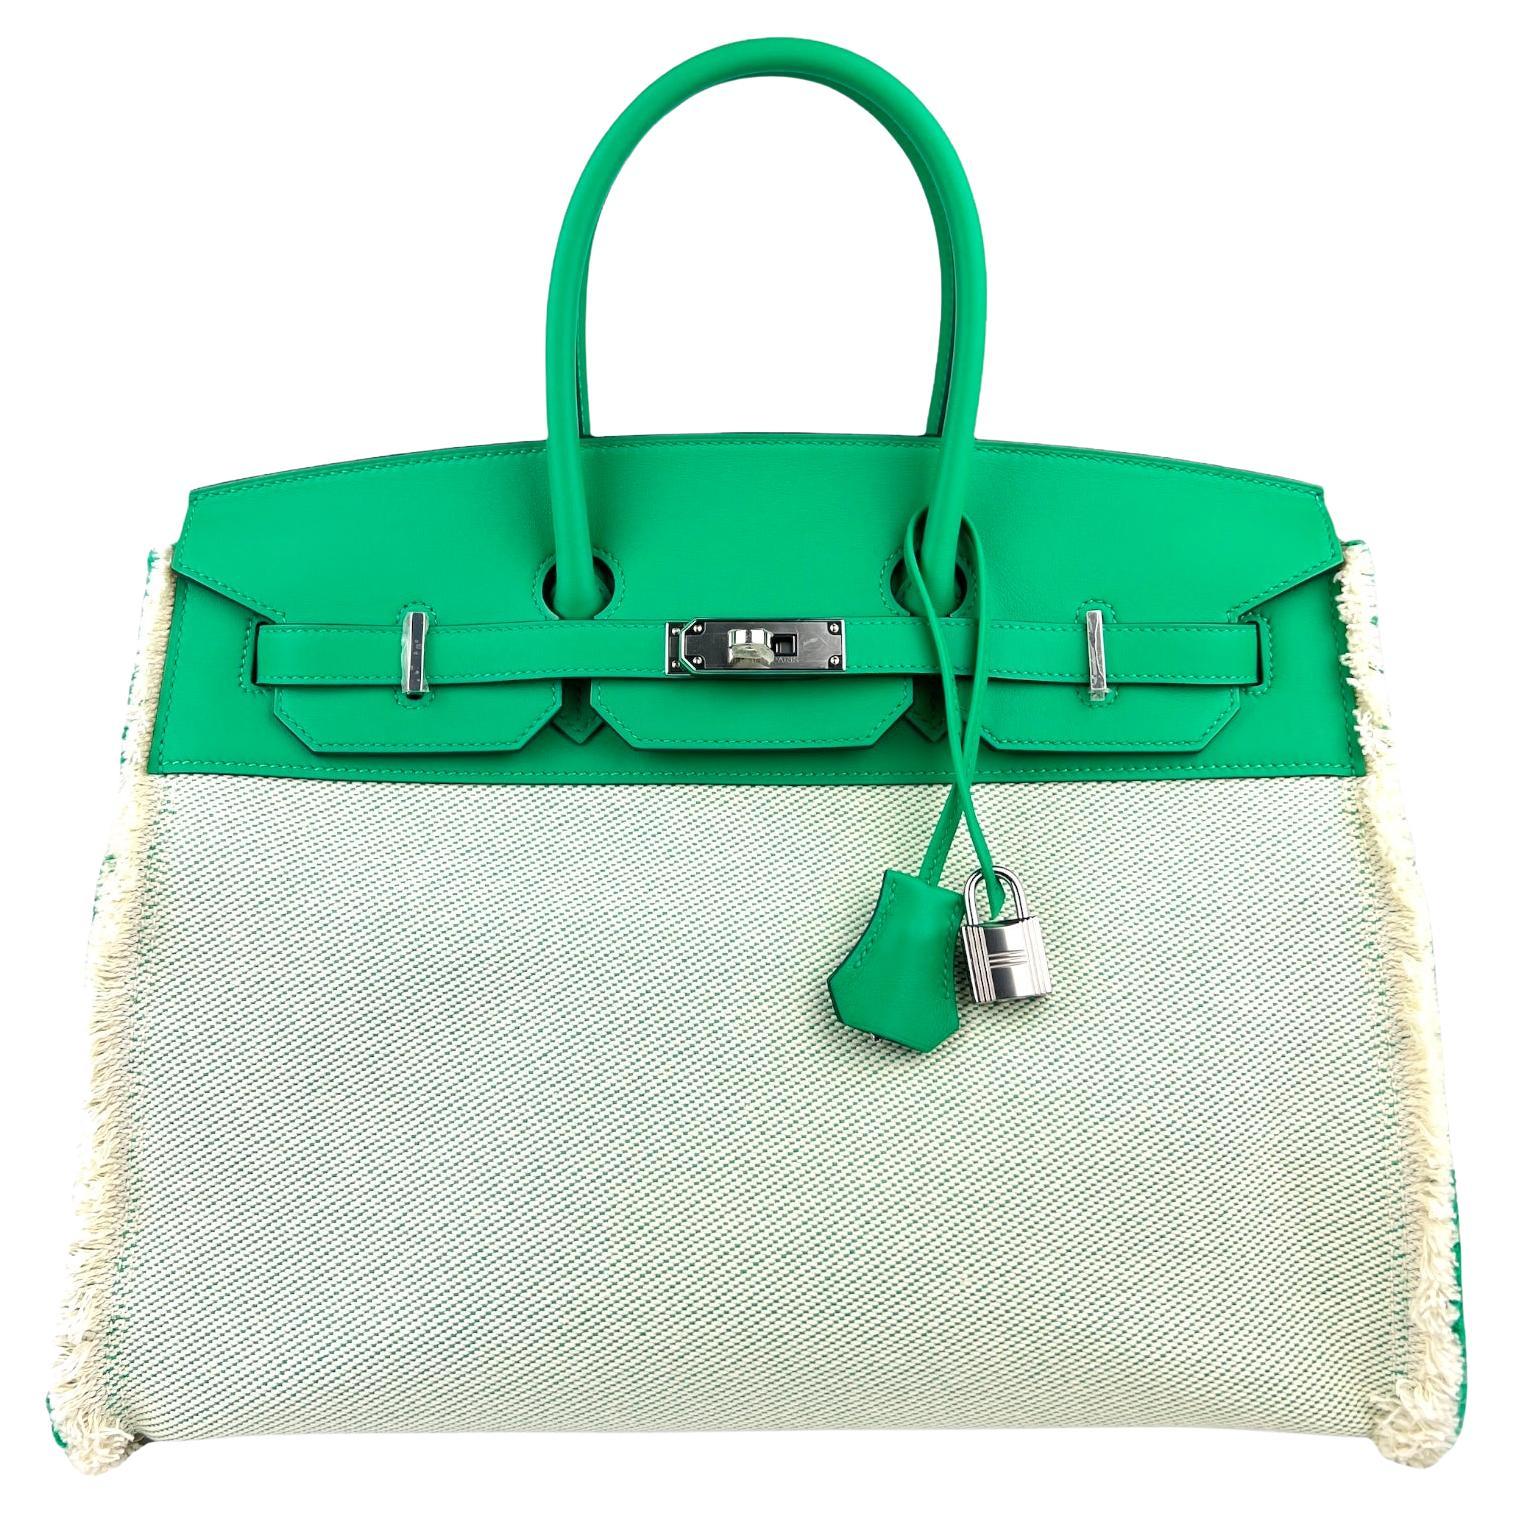 Hermes Birkin 35 Fray Fray Menthe Mint Green Leather Toile Limited Edition 2021